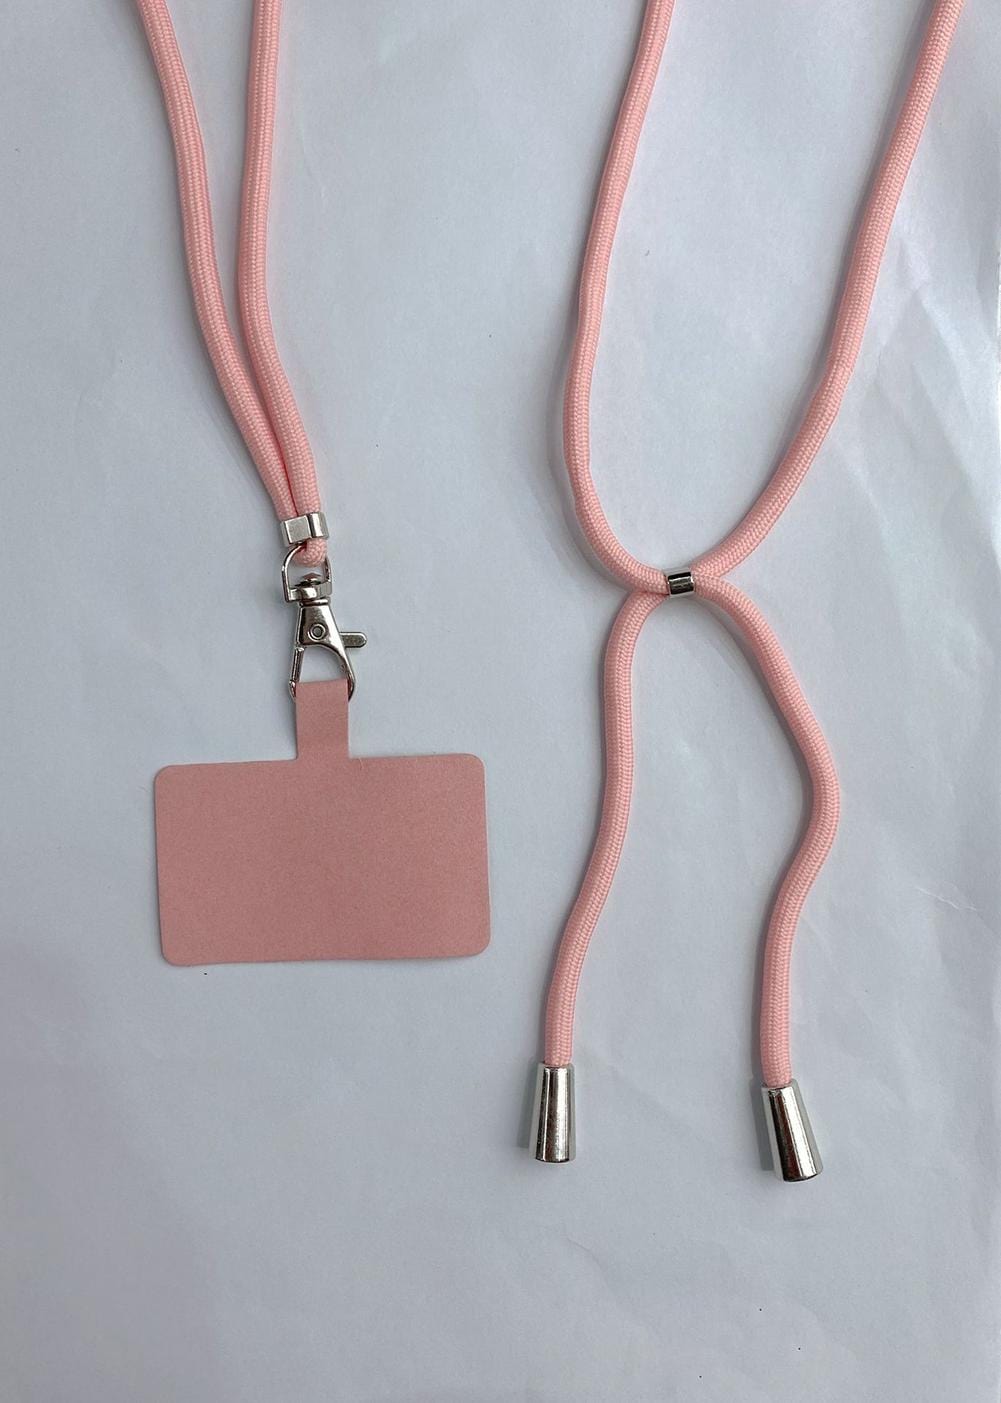 Universal Phone Lanyard Card Fixed Mobile Phone Shell with Colorful Neck Cord - Smart Tech Shopping